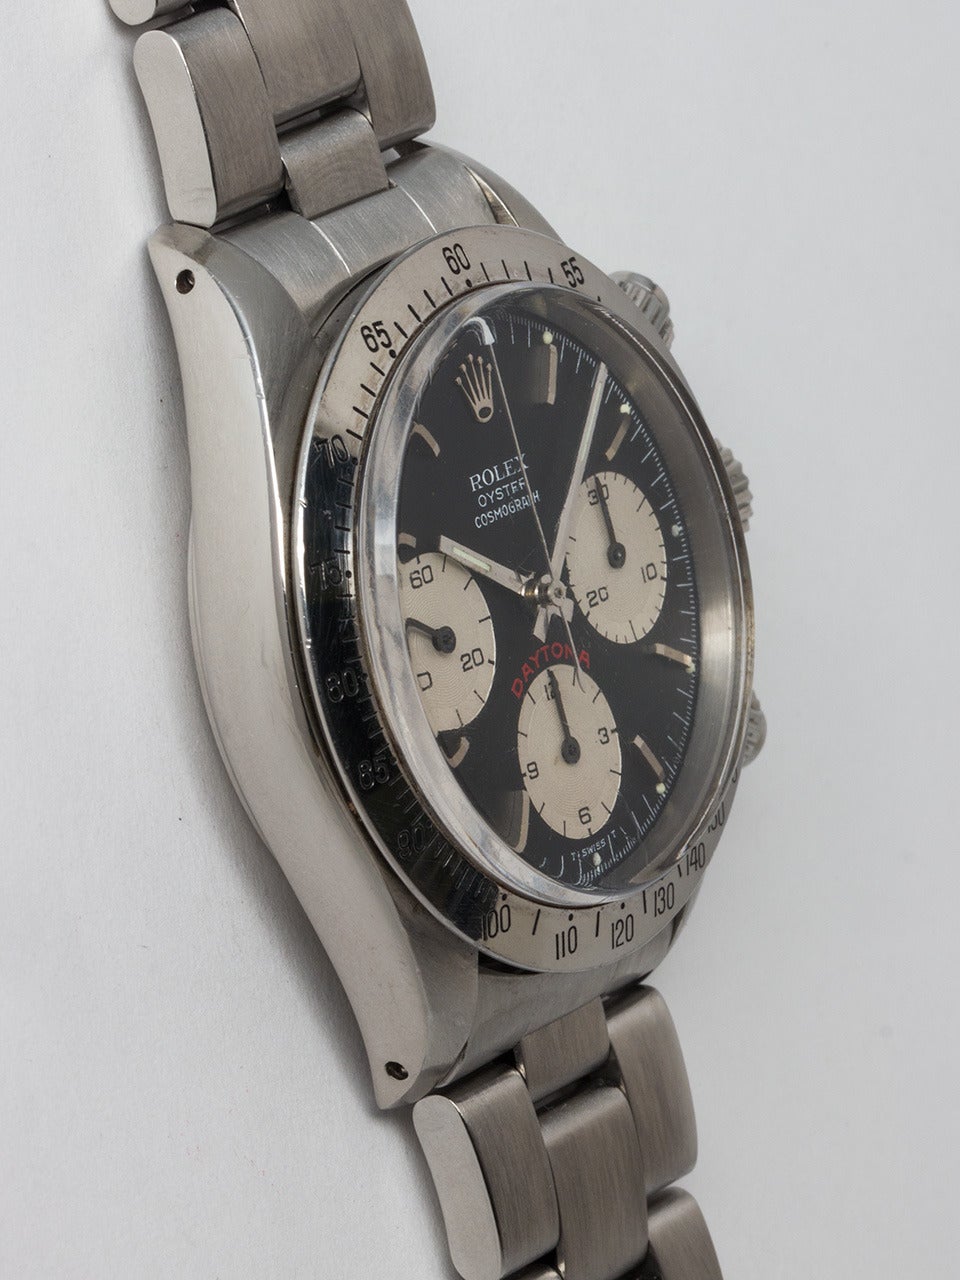 Rolex Stainless Steel Daytona Wristwatch ref 6265 serial# 6.1 million circa 1979.  Very clean (appears to be unpolished) original 200 mph tachometer bezel and acrylic crystal. Pleasing original matte black 